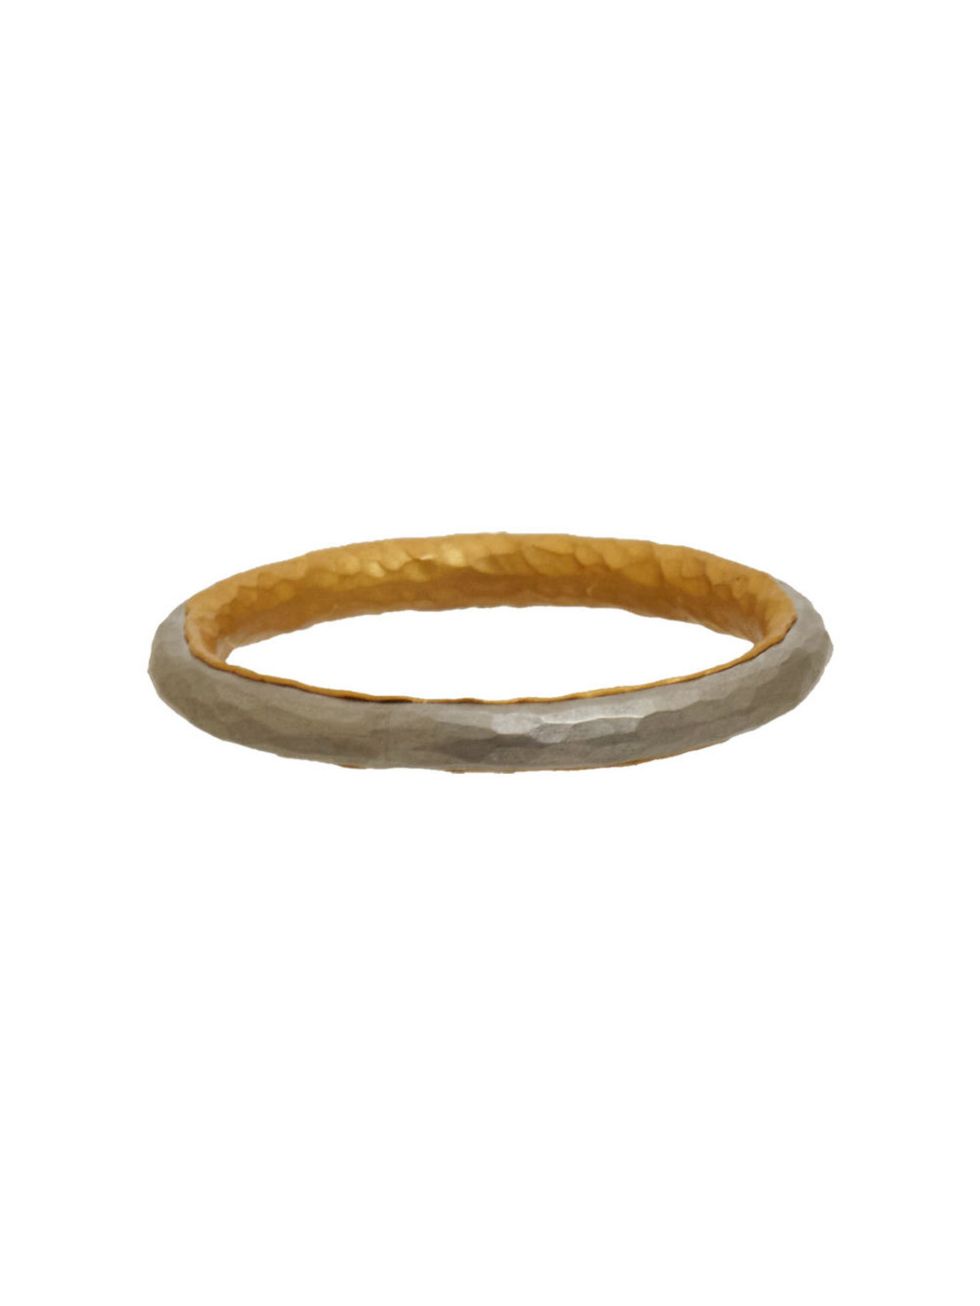 Tan, Natural material, Jewellery, Body jewelry, Beige, Ring, Circle, Bangle, Wedding ceremony supply, Gemstone, 